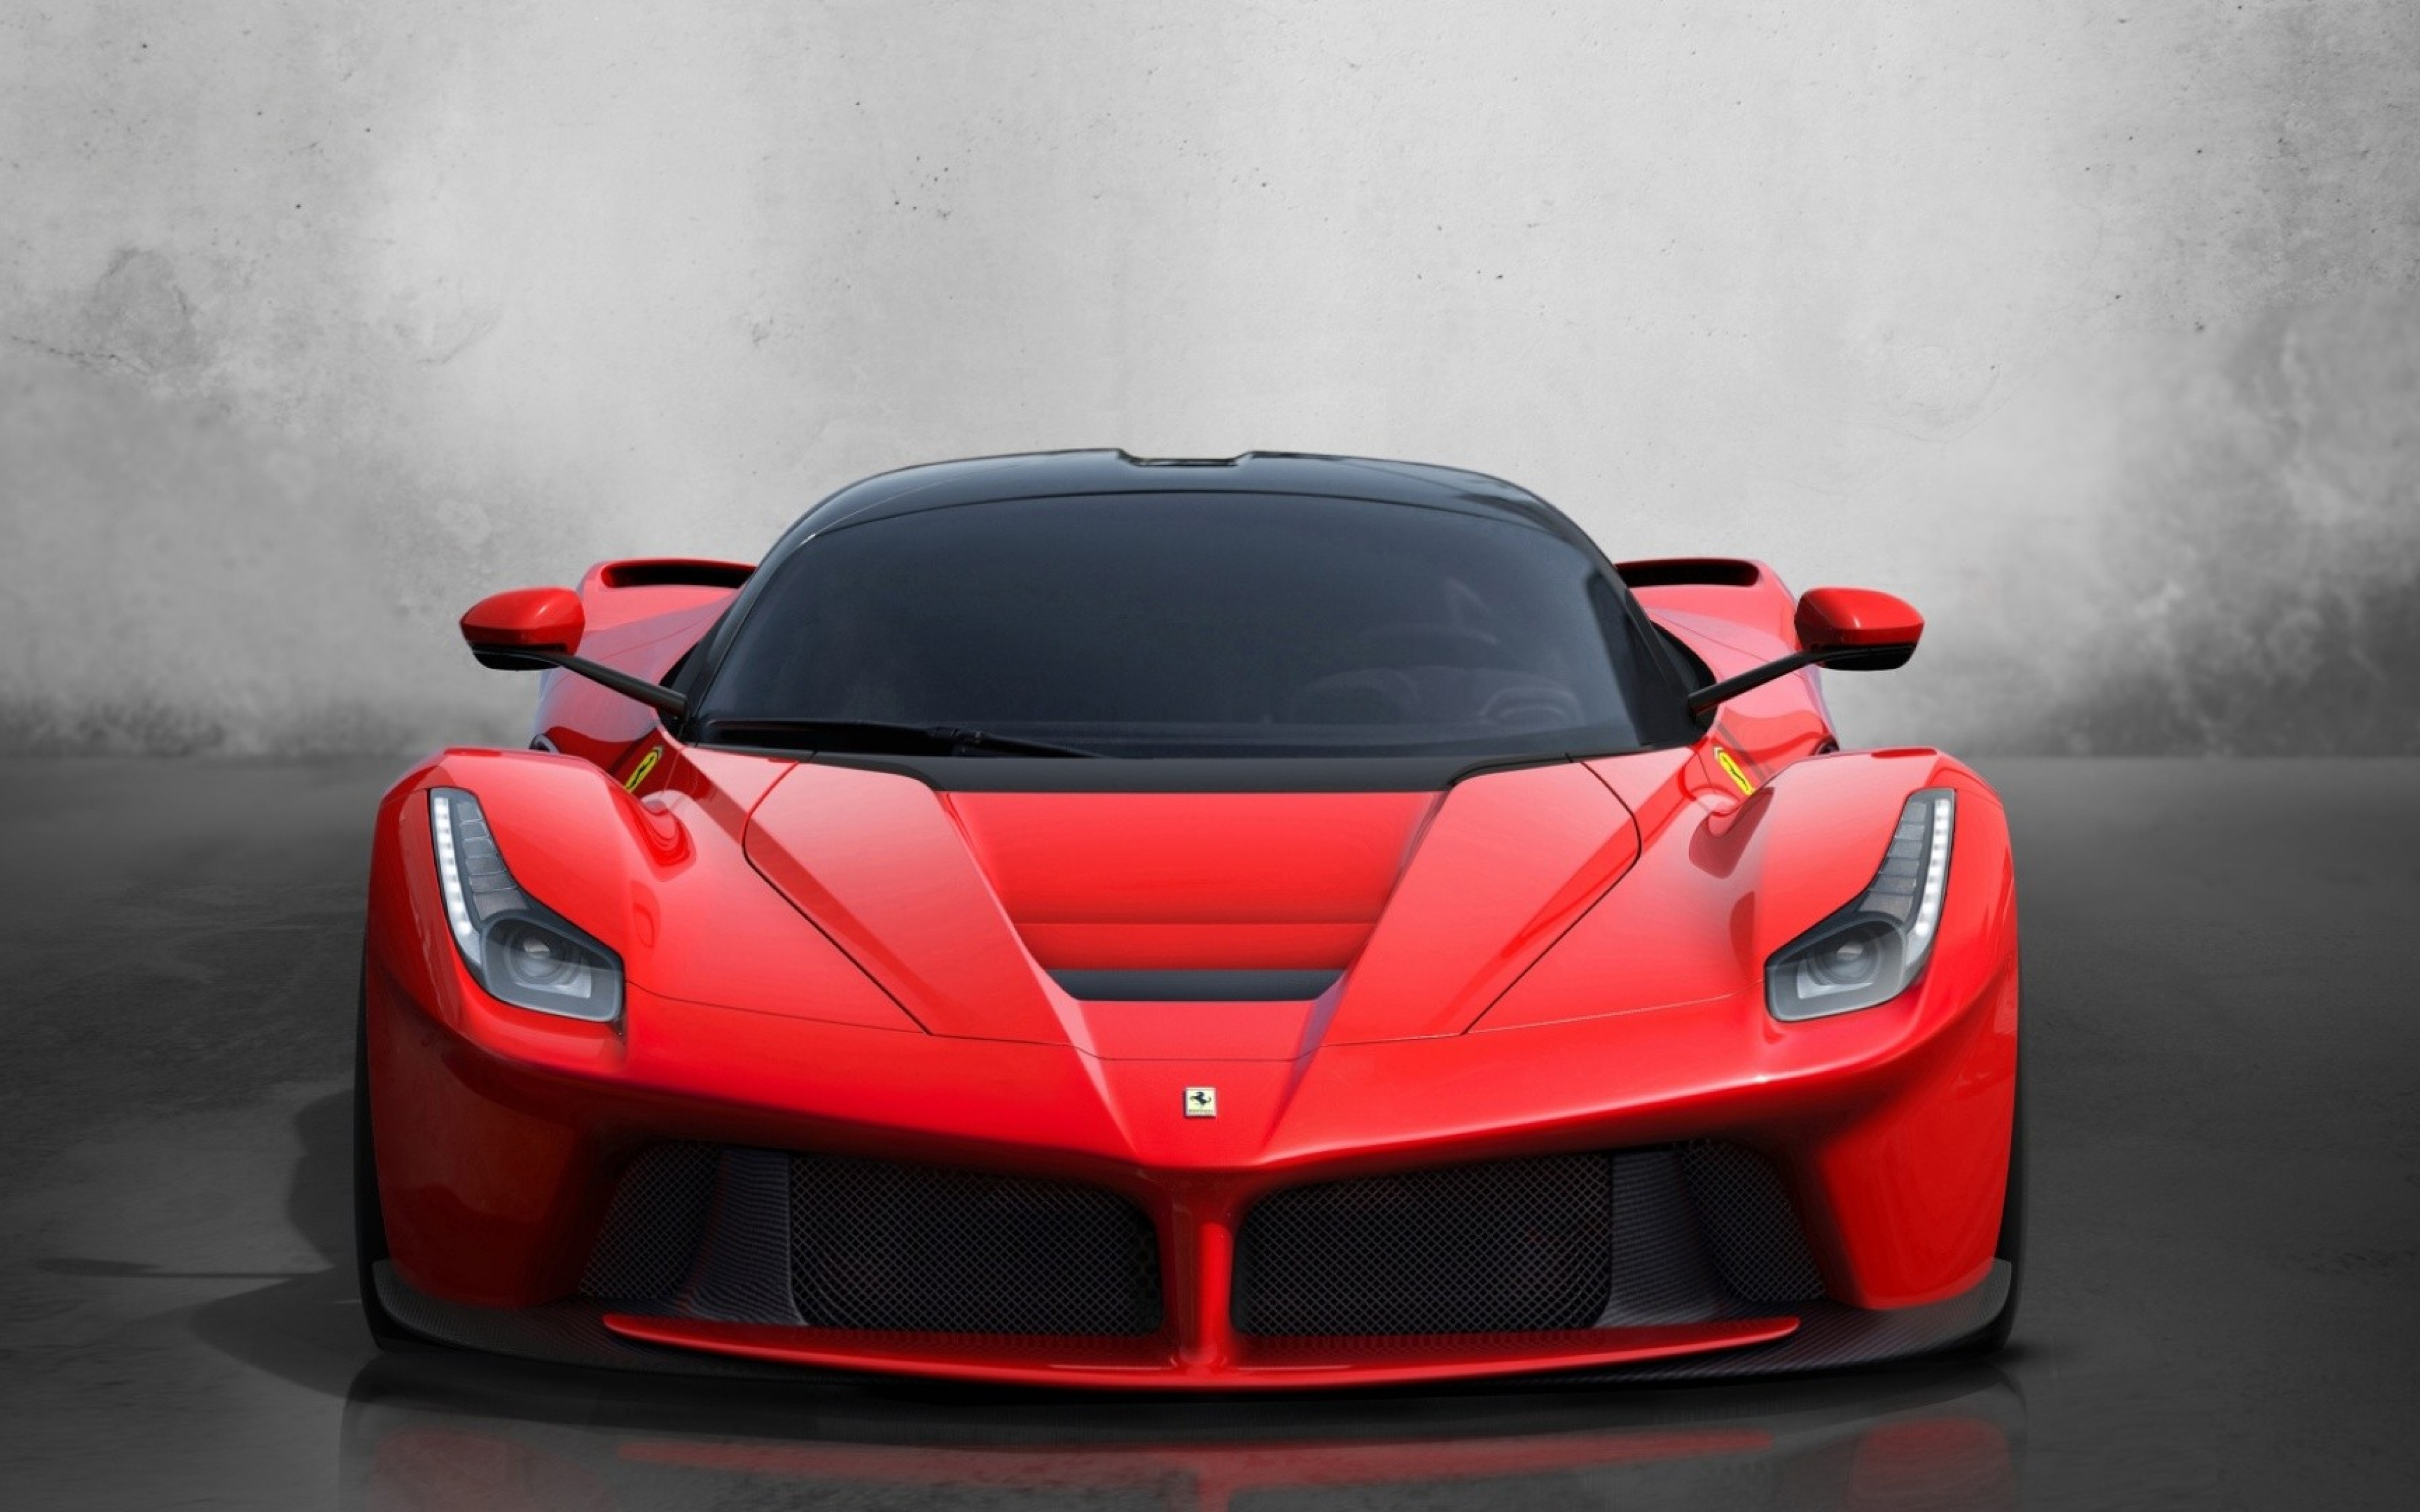 Ferrari Wallpapers and Background Images   stmednet